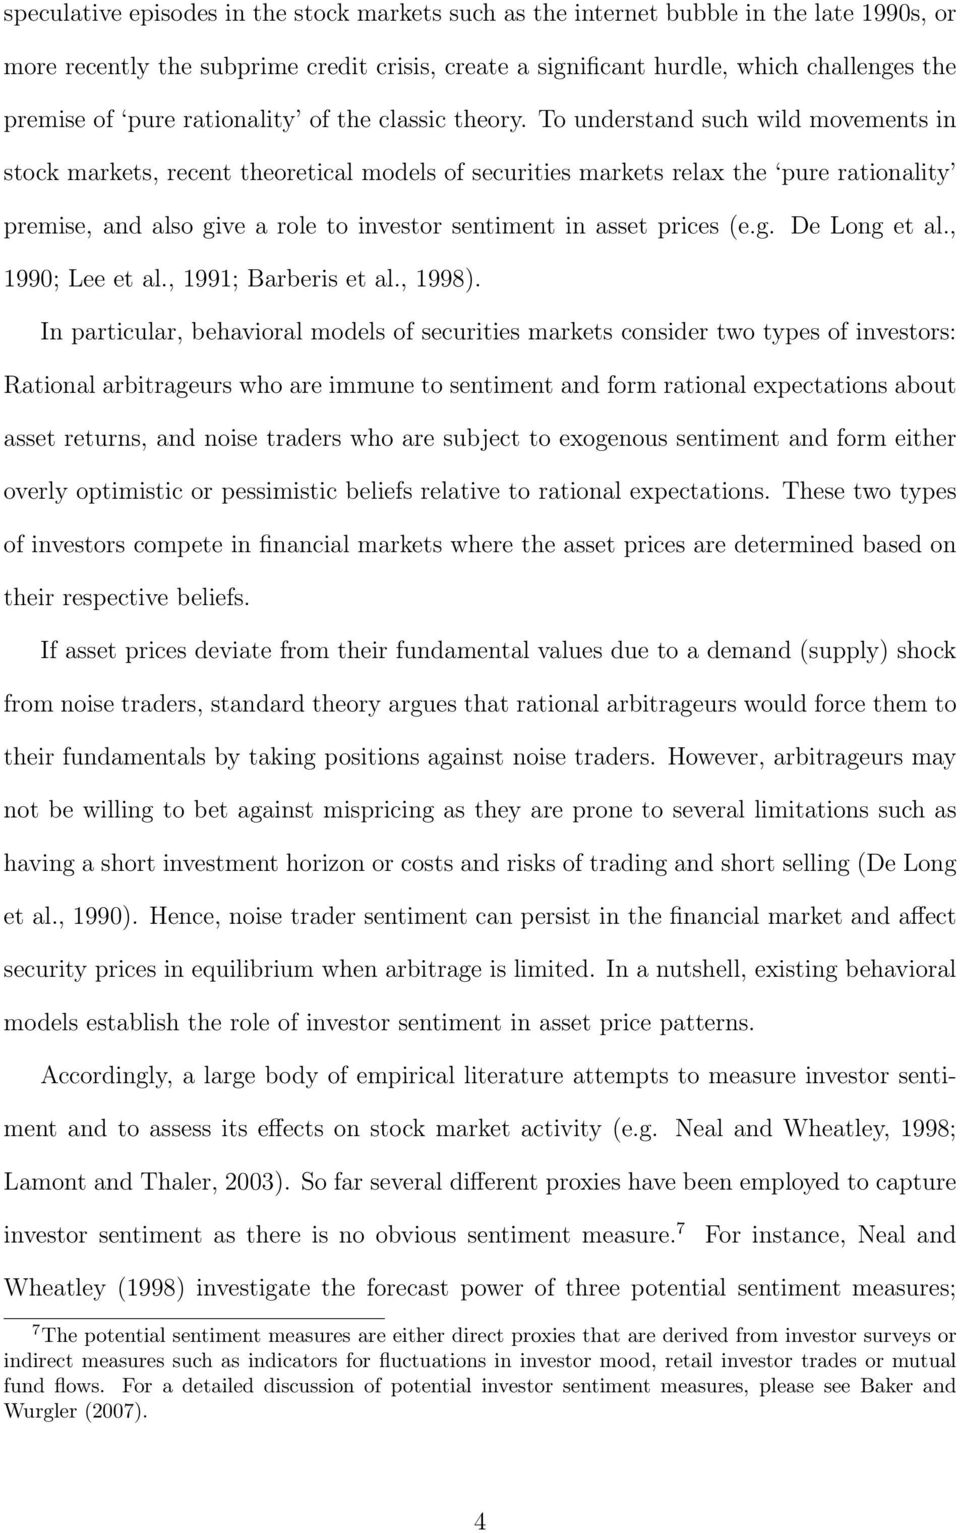 To understand such wild movements in stock markets, recent theoretical models of securities markets relax the pure rationality premise, and also give a role to investor sentiment in asset prices (e.g. De Long et al.